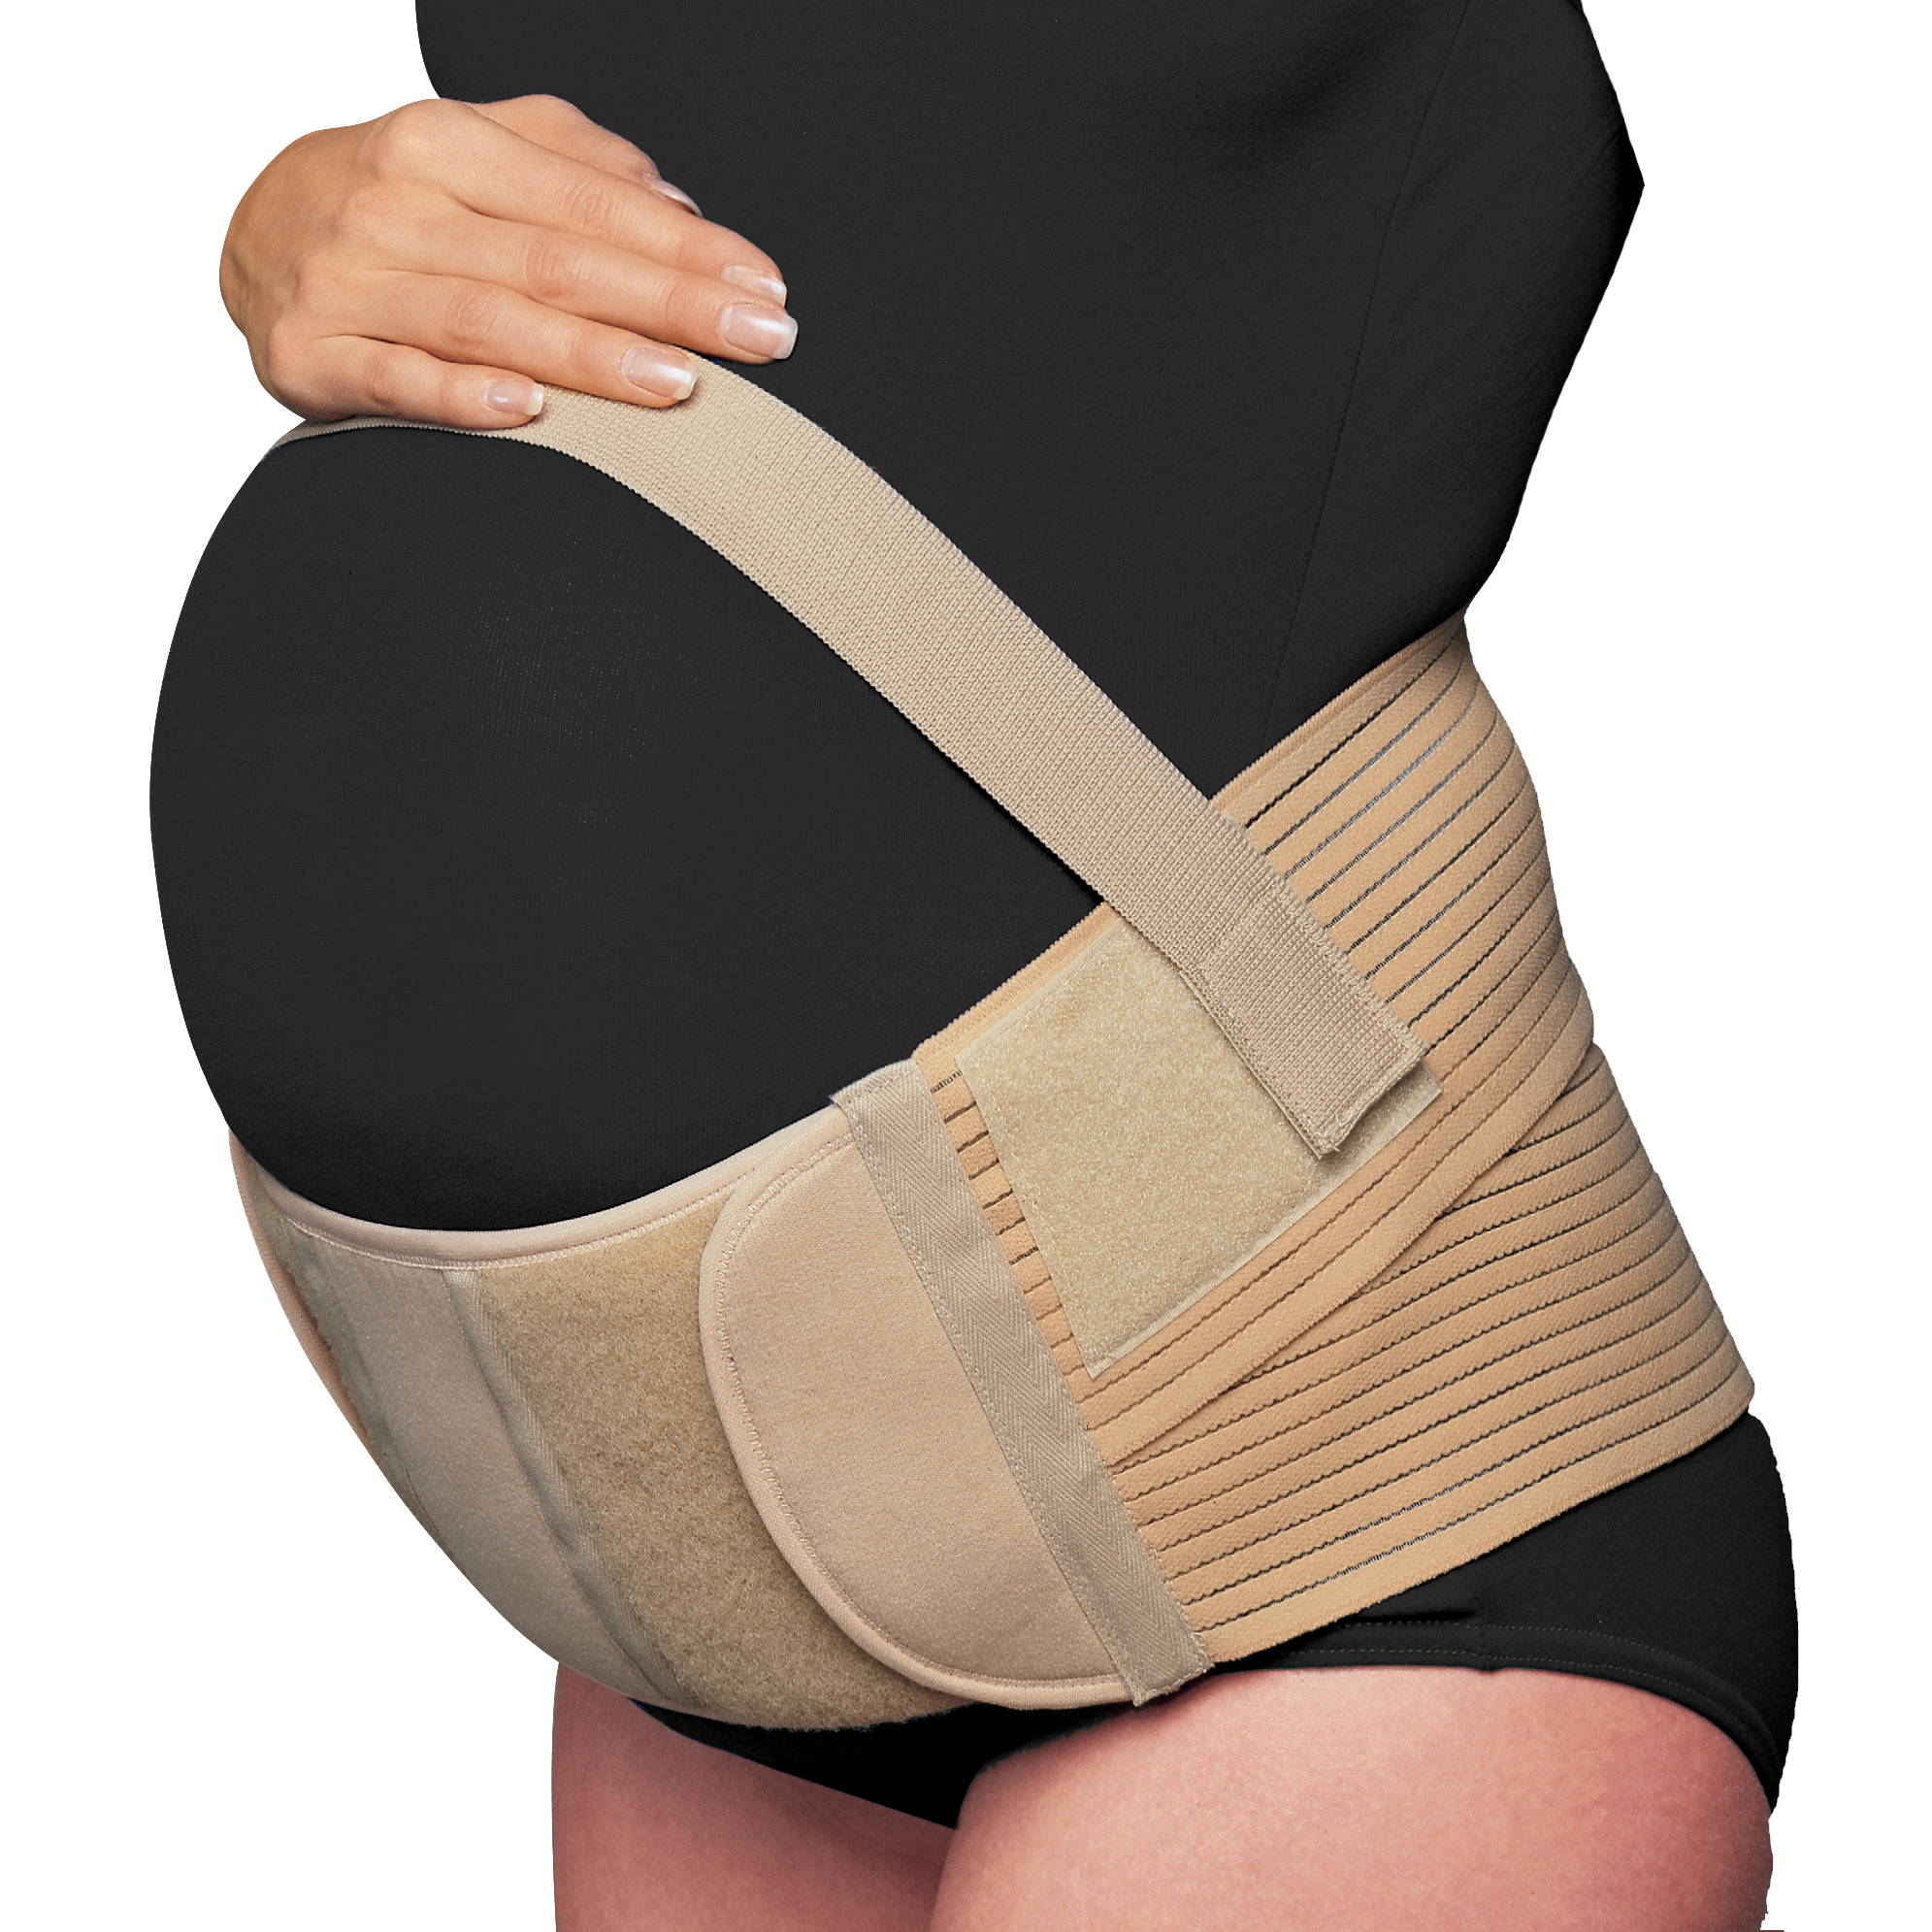 2786 / COMFORT FIT MATERNITY SUPPORT